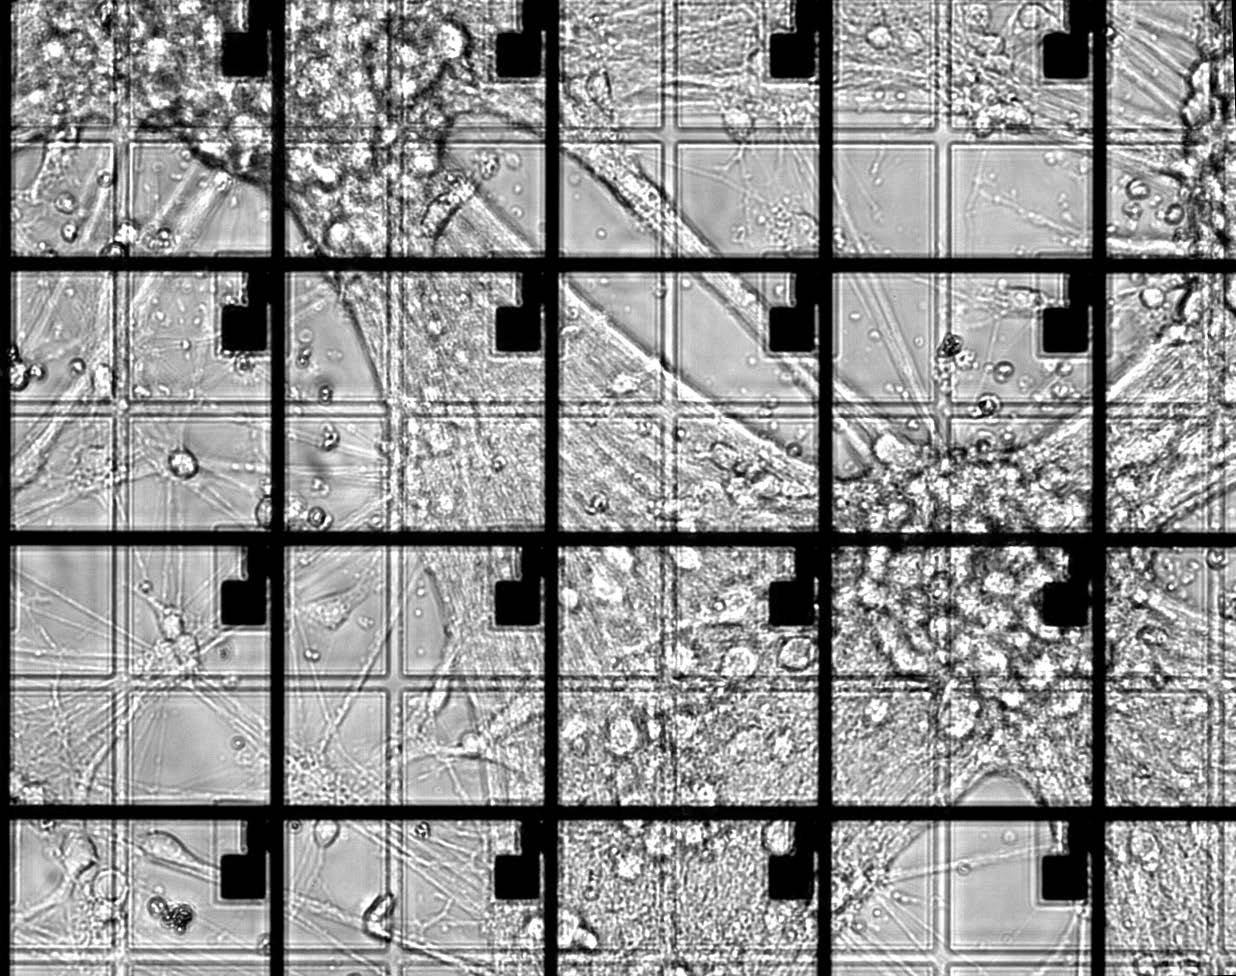 Primary cortical neuron cells culture on a TFT array device.